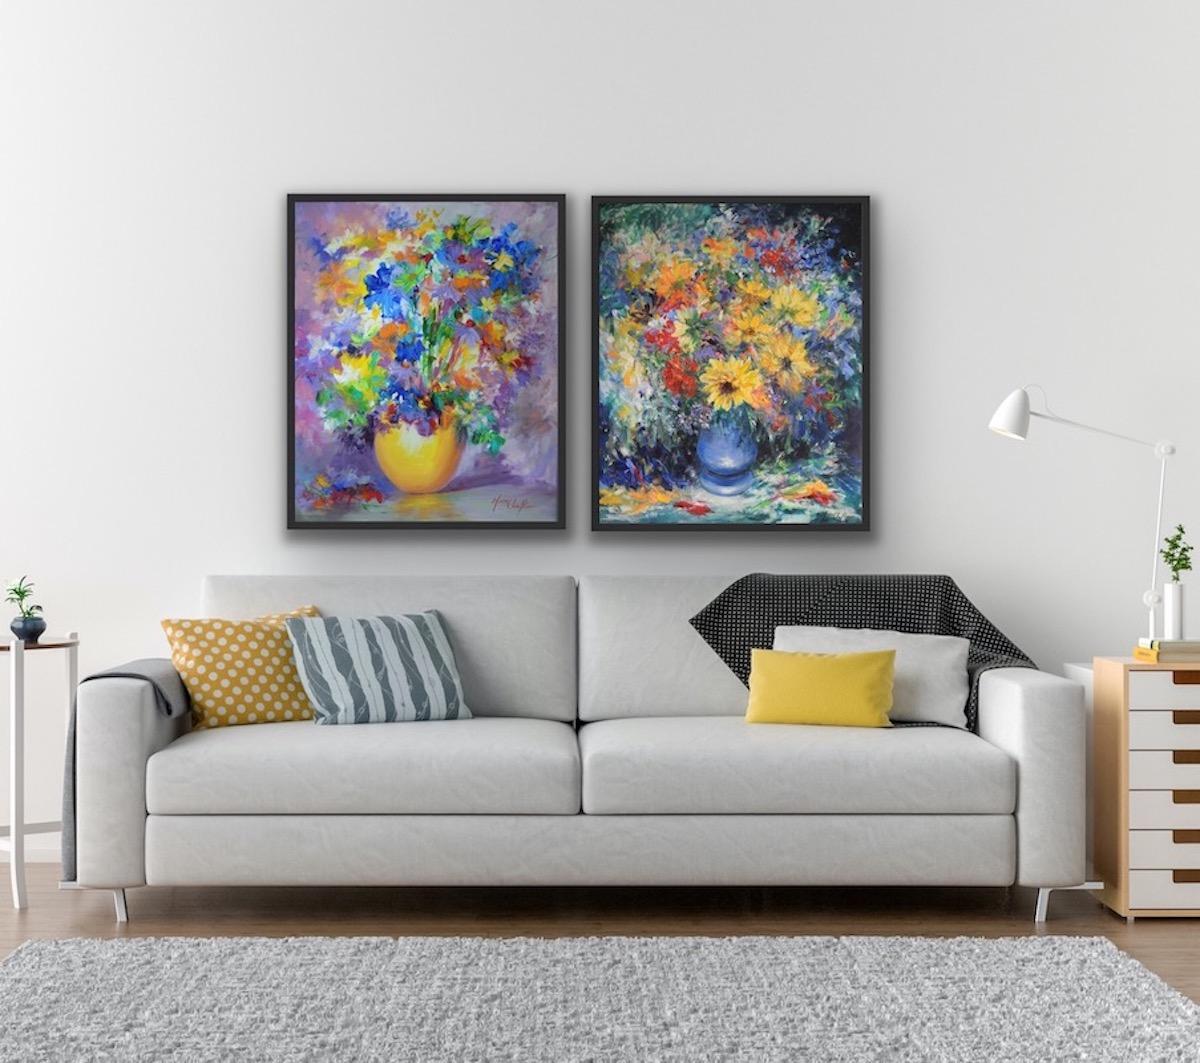 Diptych of two original paintings, Autumn Glory and September Glory by Mary Chaplin

Autumn Glory:
Autumn Glory is an impressionistic bouquet: Sun flowers, rubeckias, asters make up this bouquet collected in the garden of the artist who could not